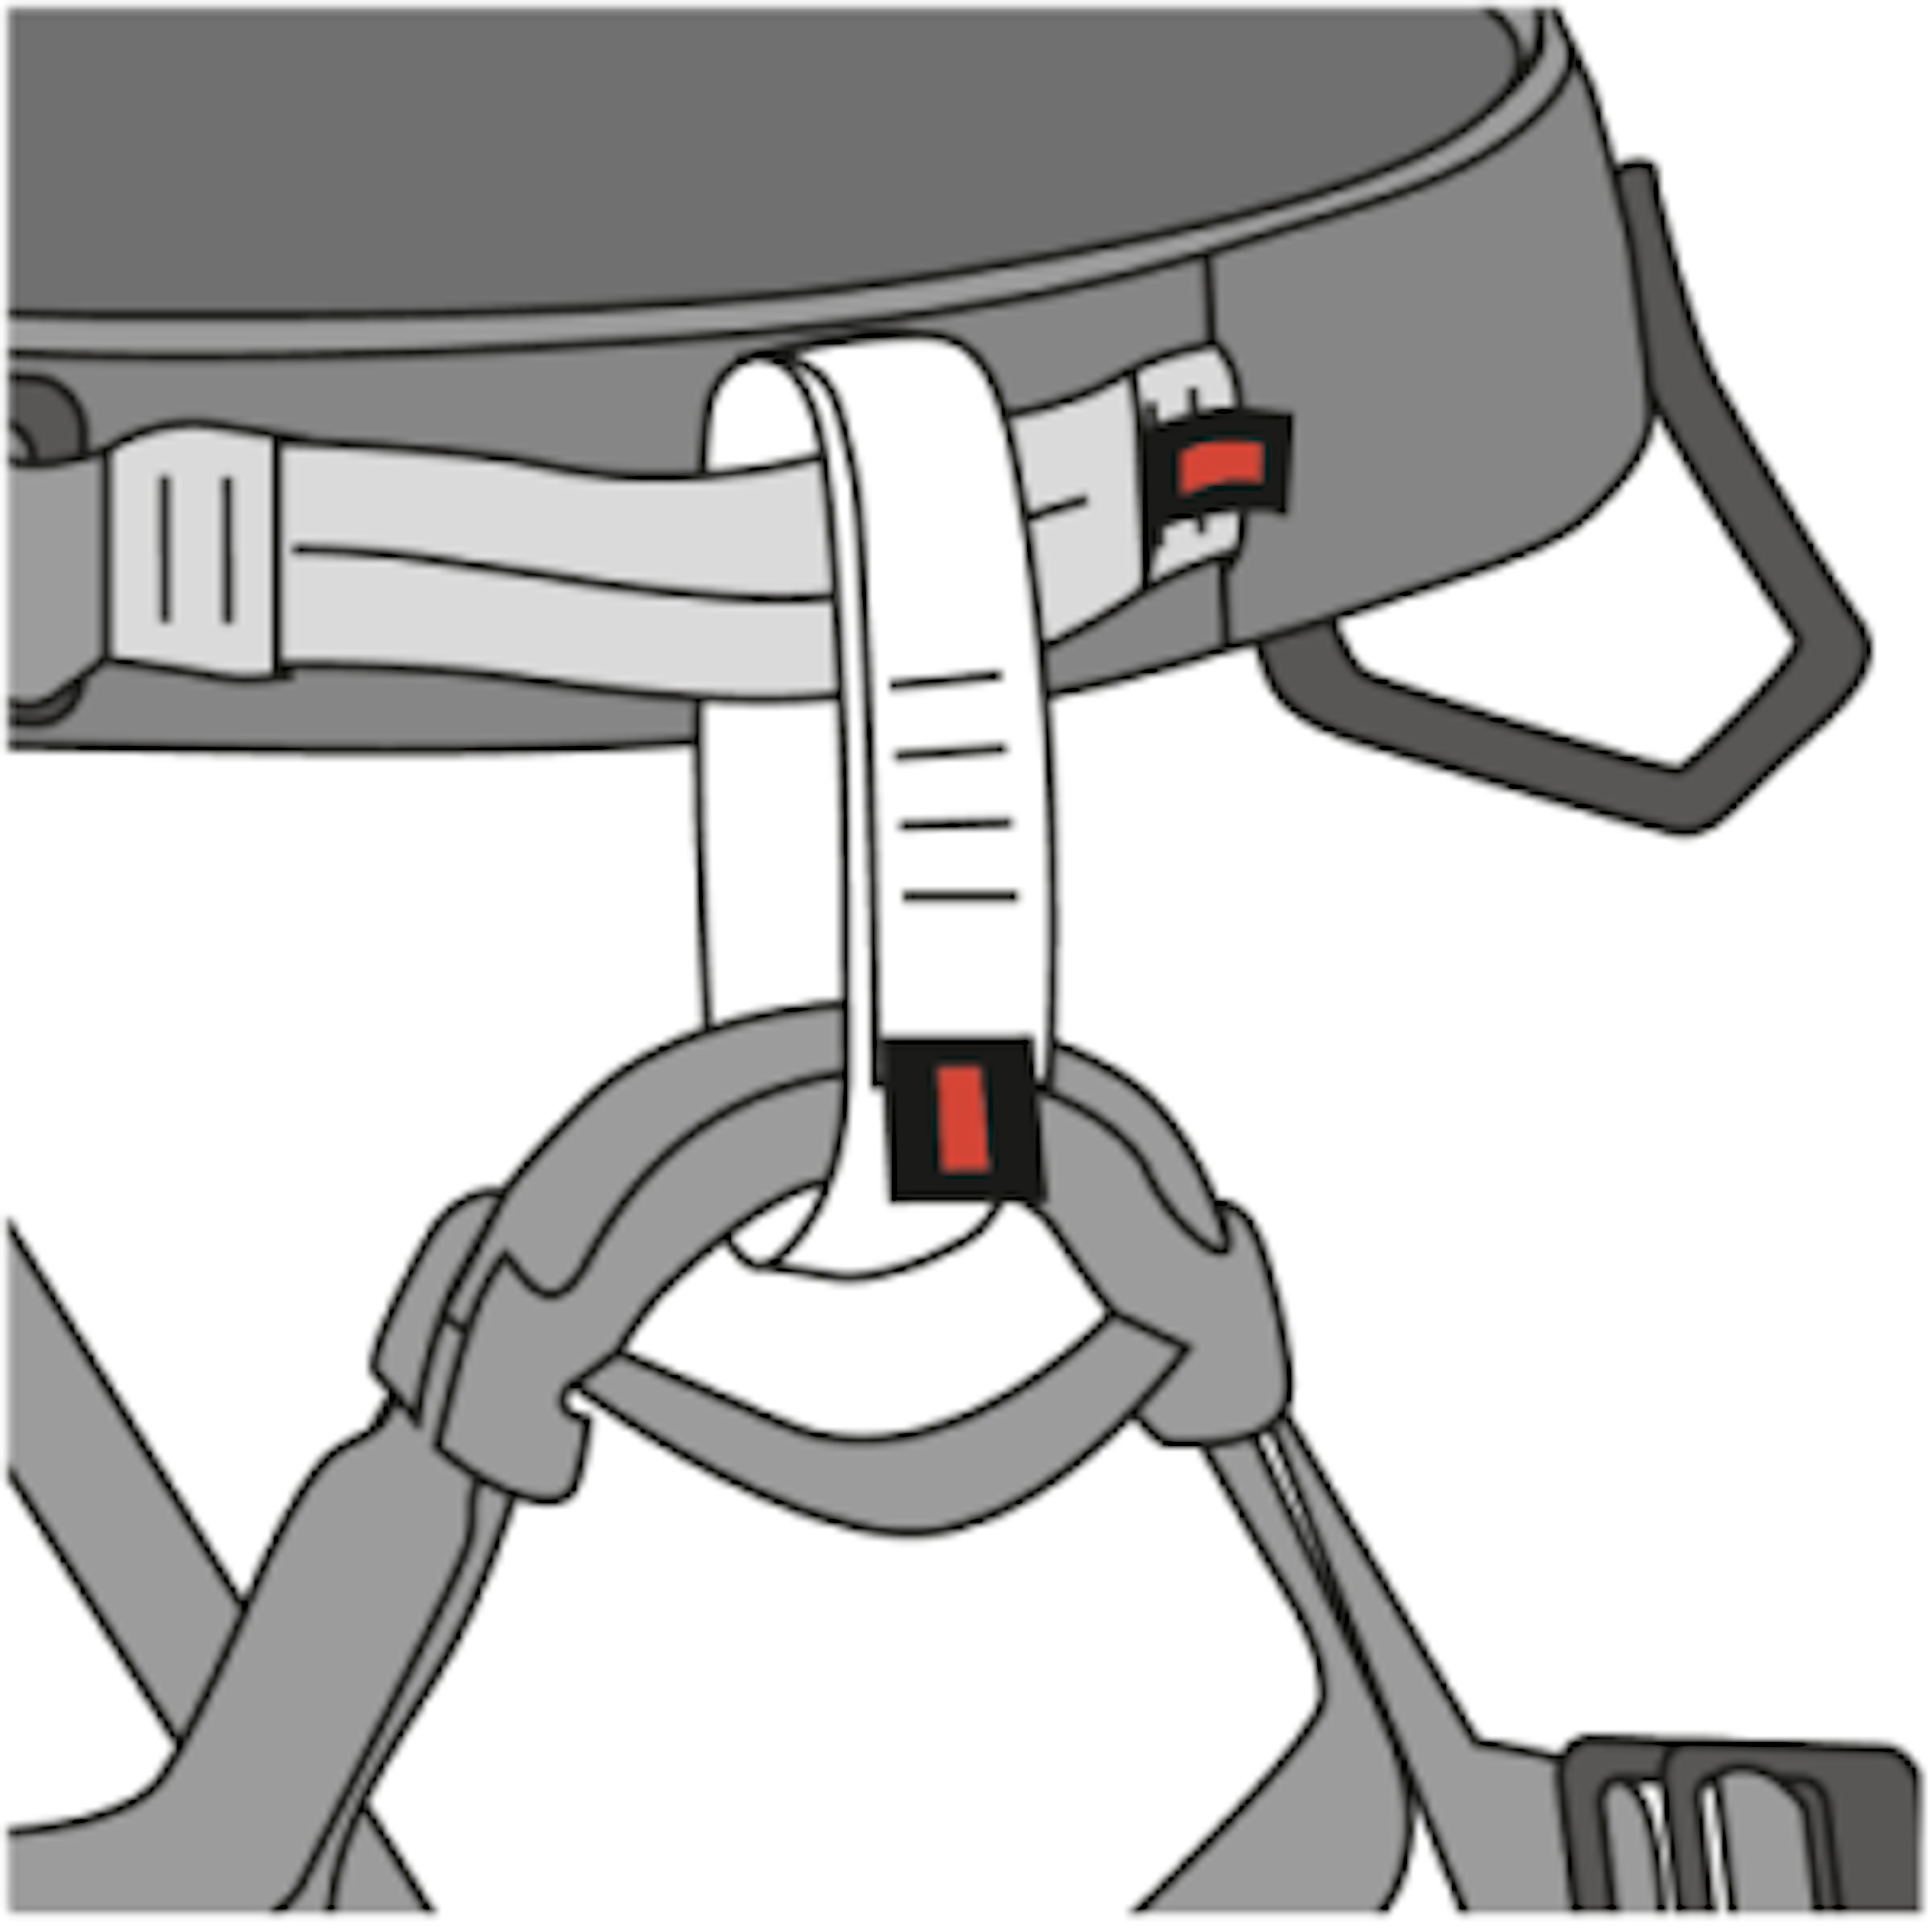 Harness - how to check